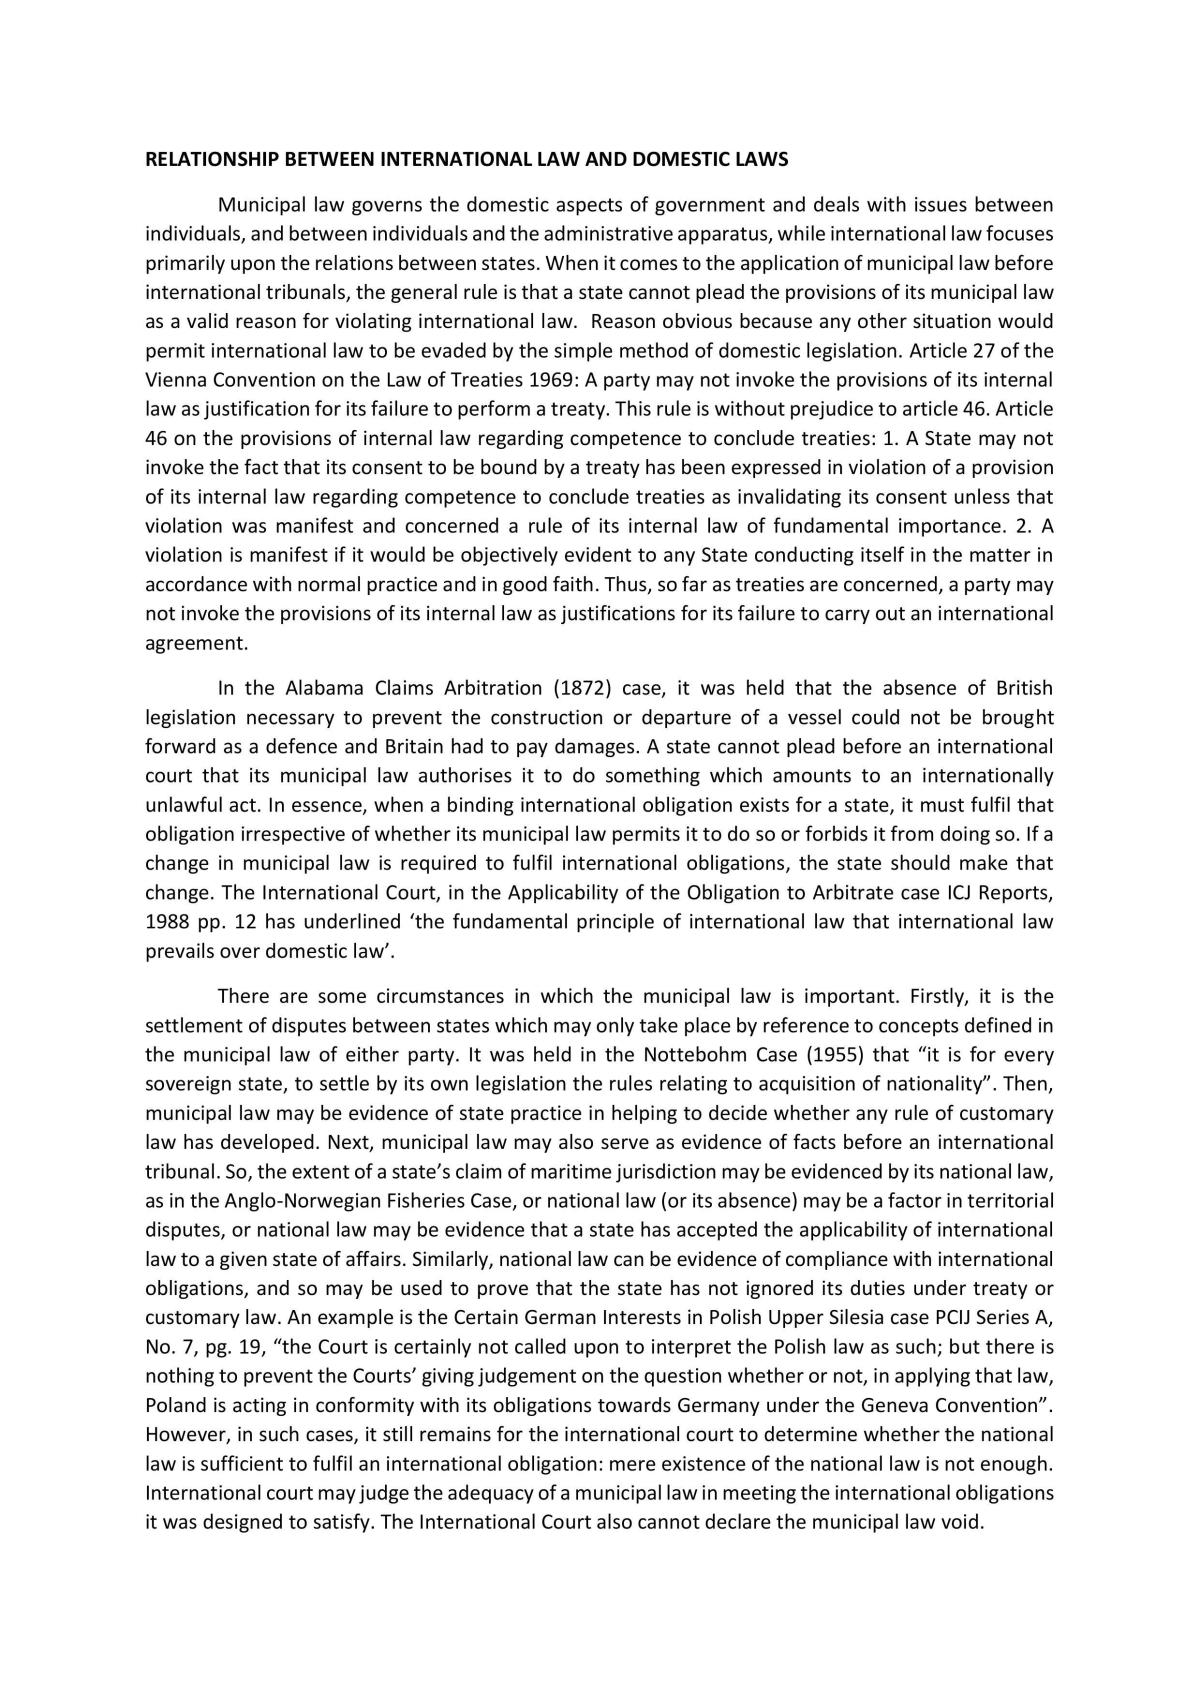 Public International Law Notes - Topic Relationship Between International Law and Domestic Laws - Page 1